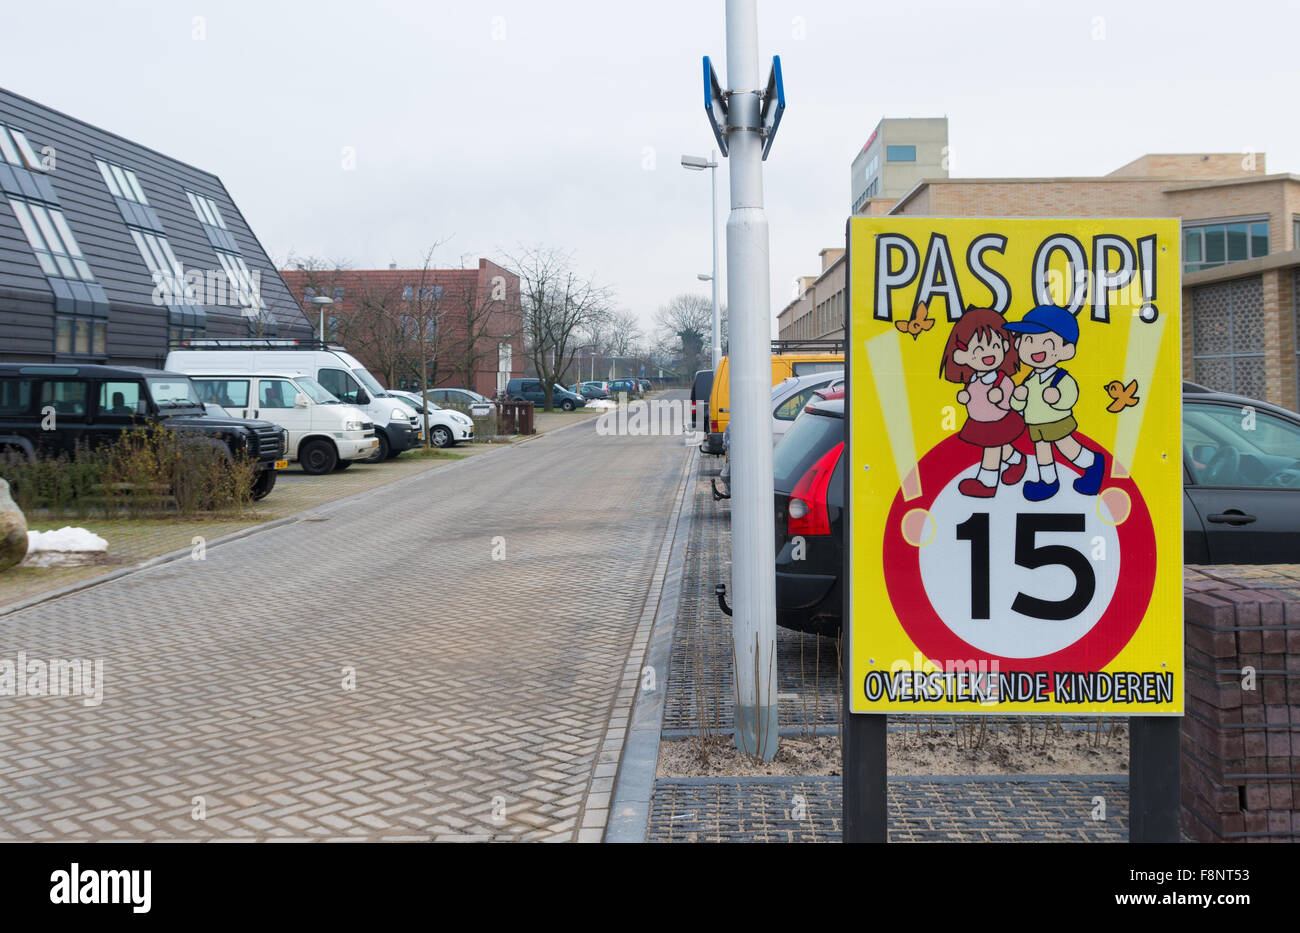 UTRECHT, NETHERLANDS - FEBRUARY 7, 2015: Beware of crossing children sign with speed limit in a residential area Stock Photo